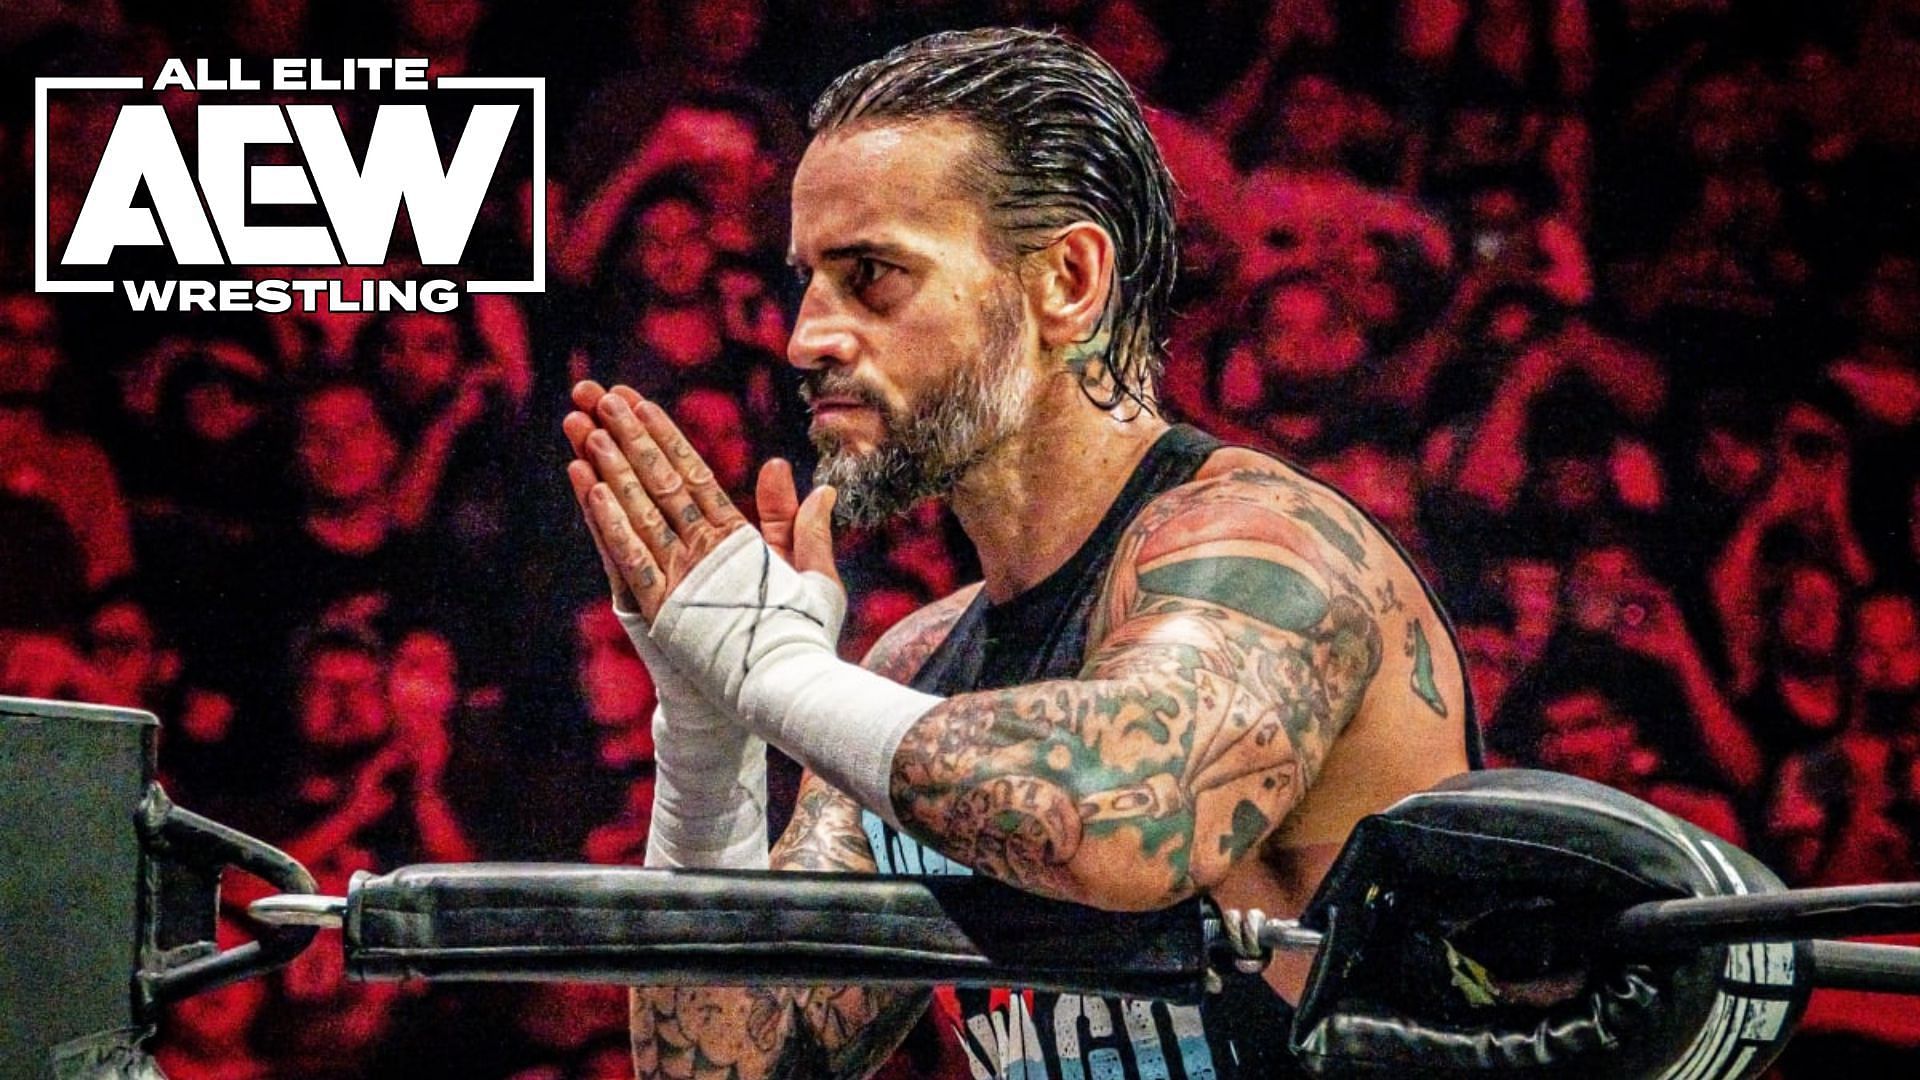 Does CM Punk have more support in AEW than reports allege?